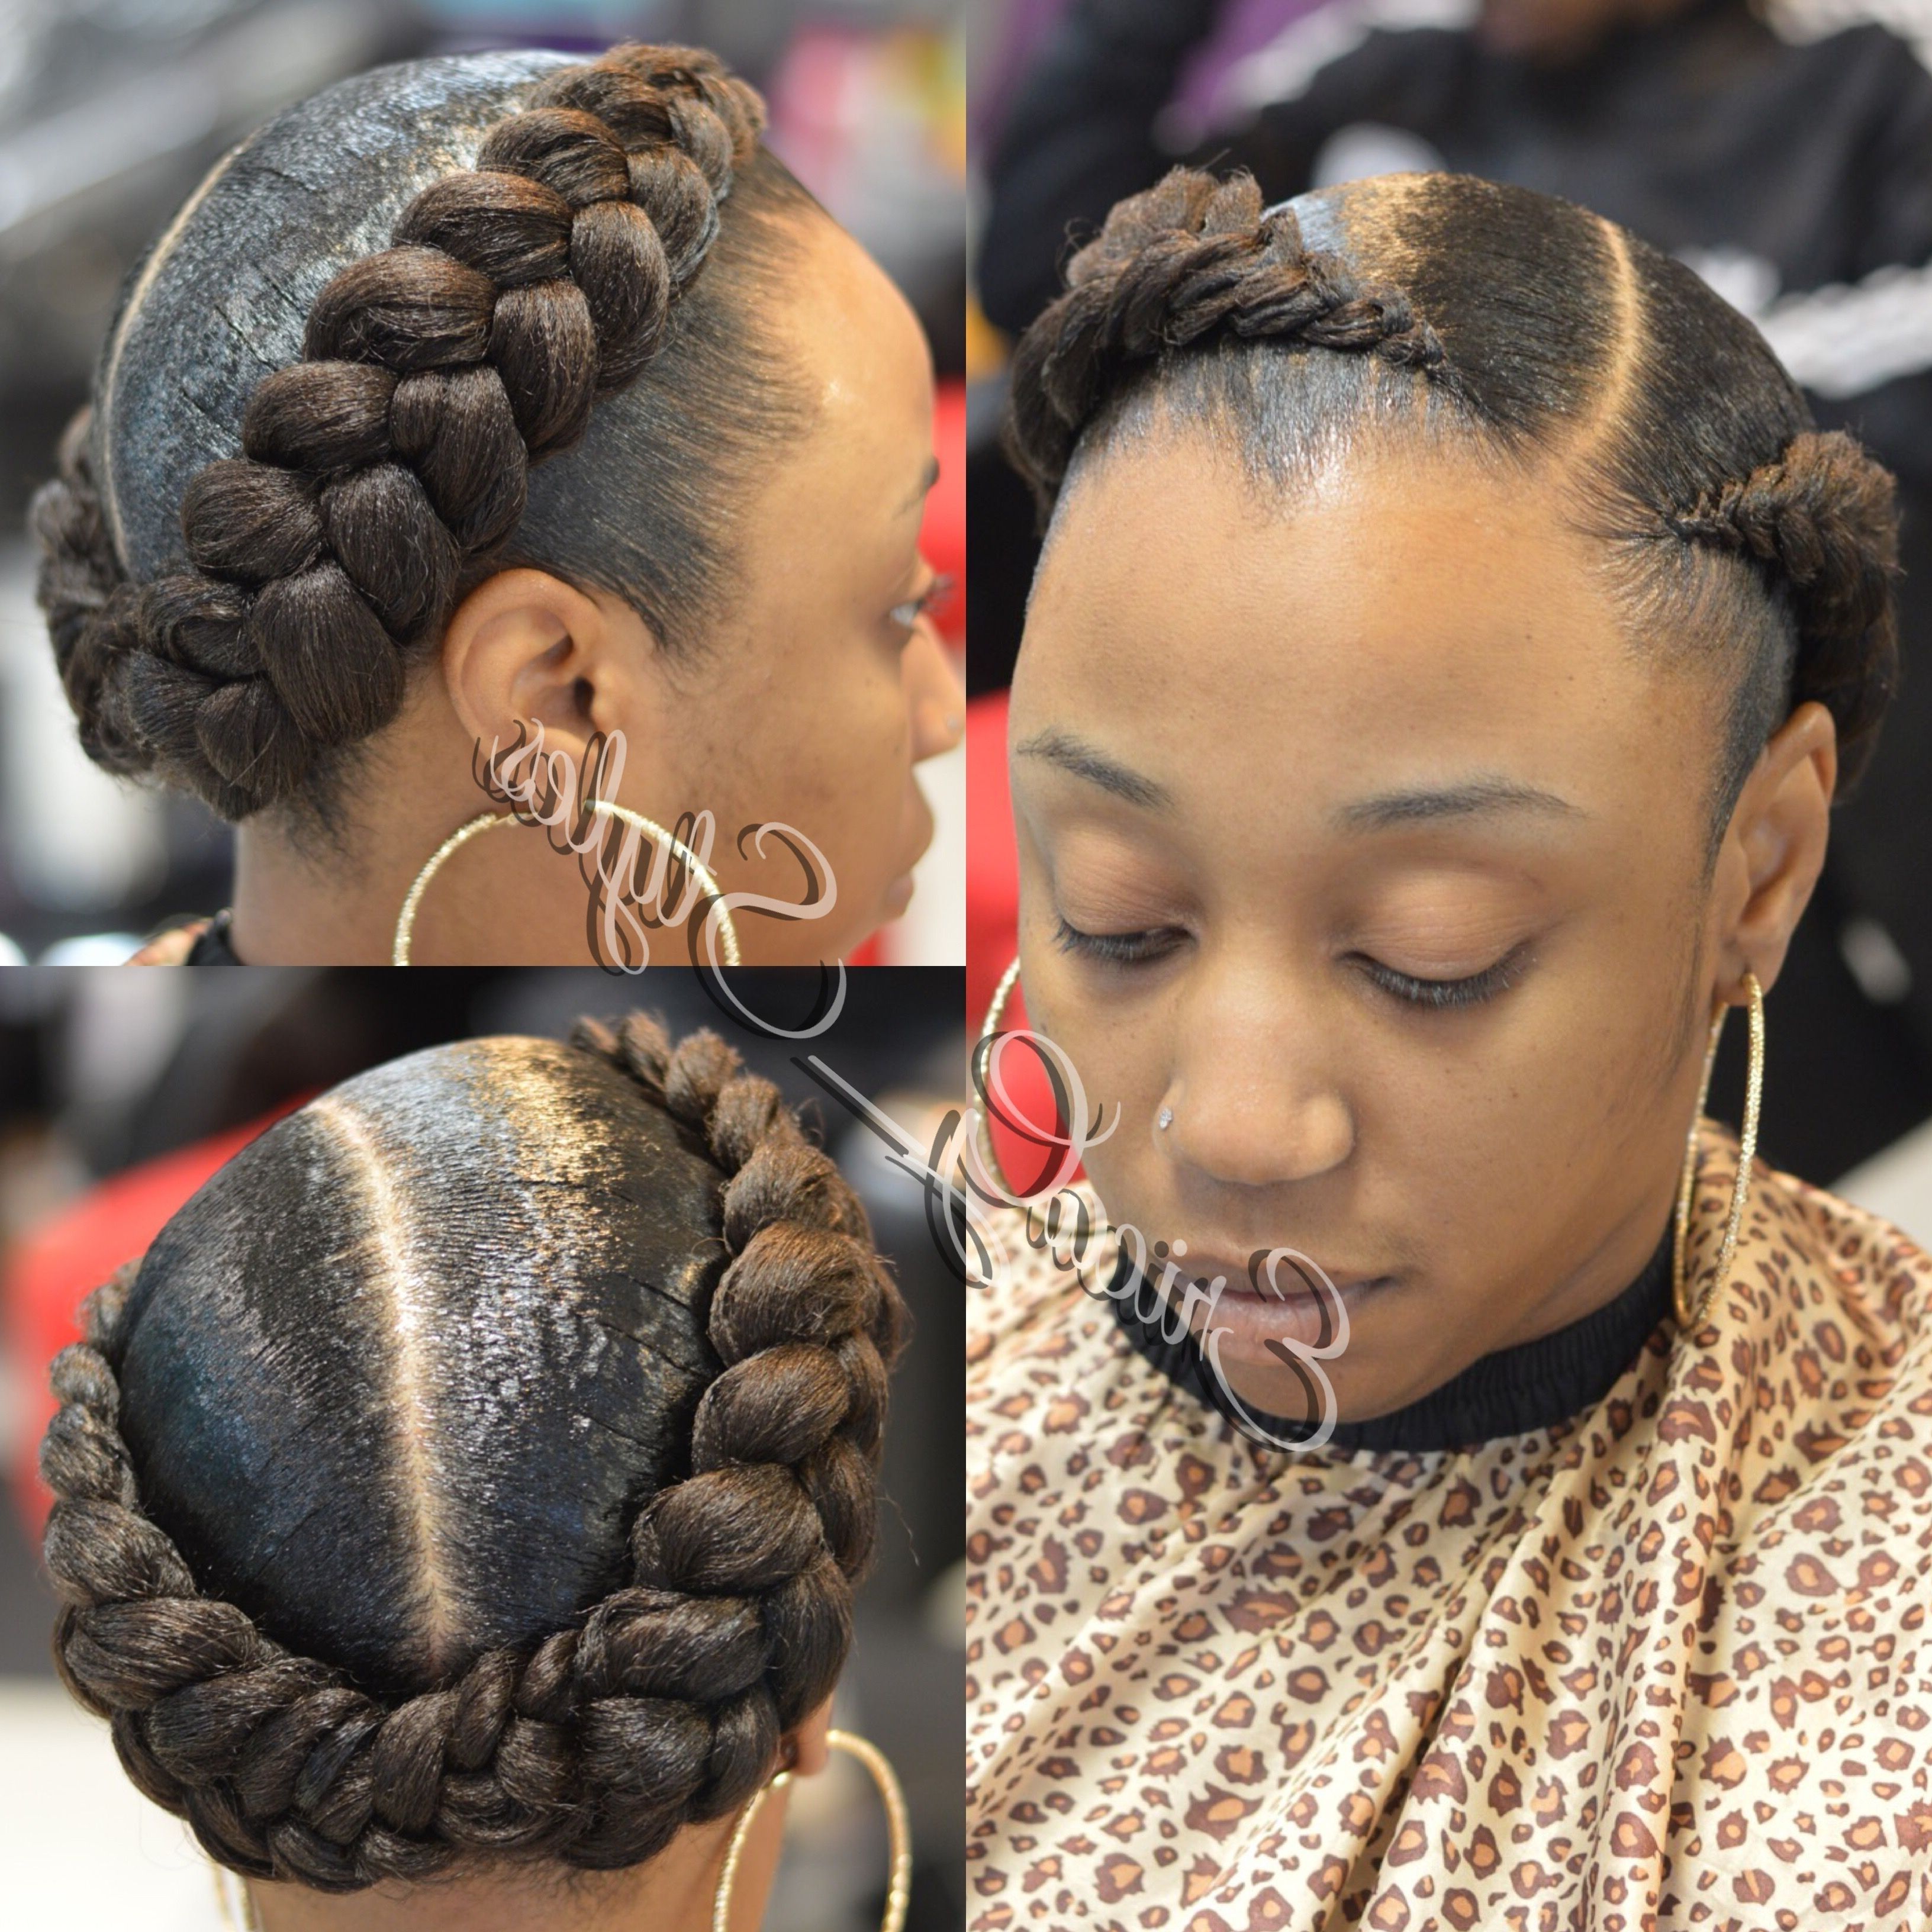 Current Braided Hairstyles Cover Forehead Throughout Email Karriebradshaw@icloud For Sample Of Free Hair Growth Oil (View 13 of 15)